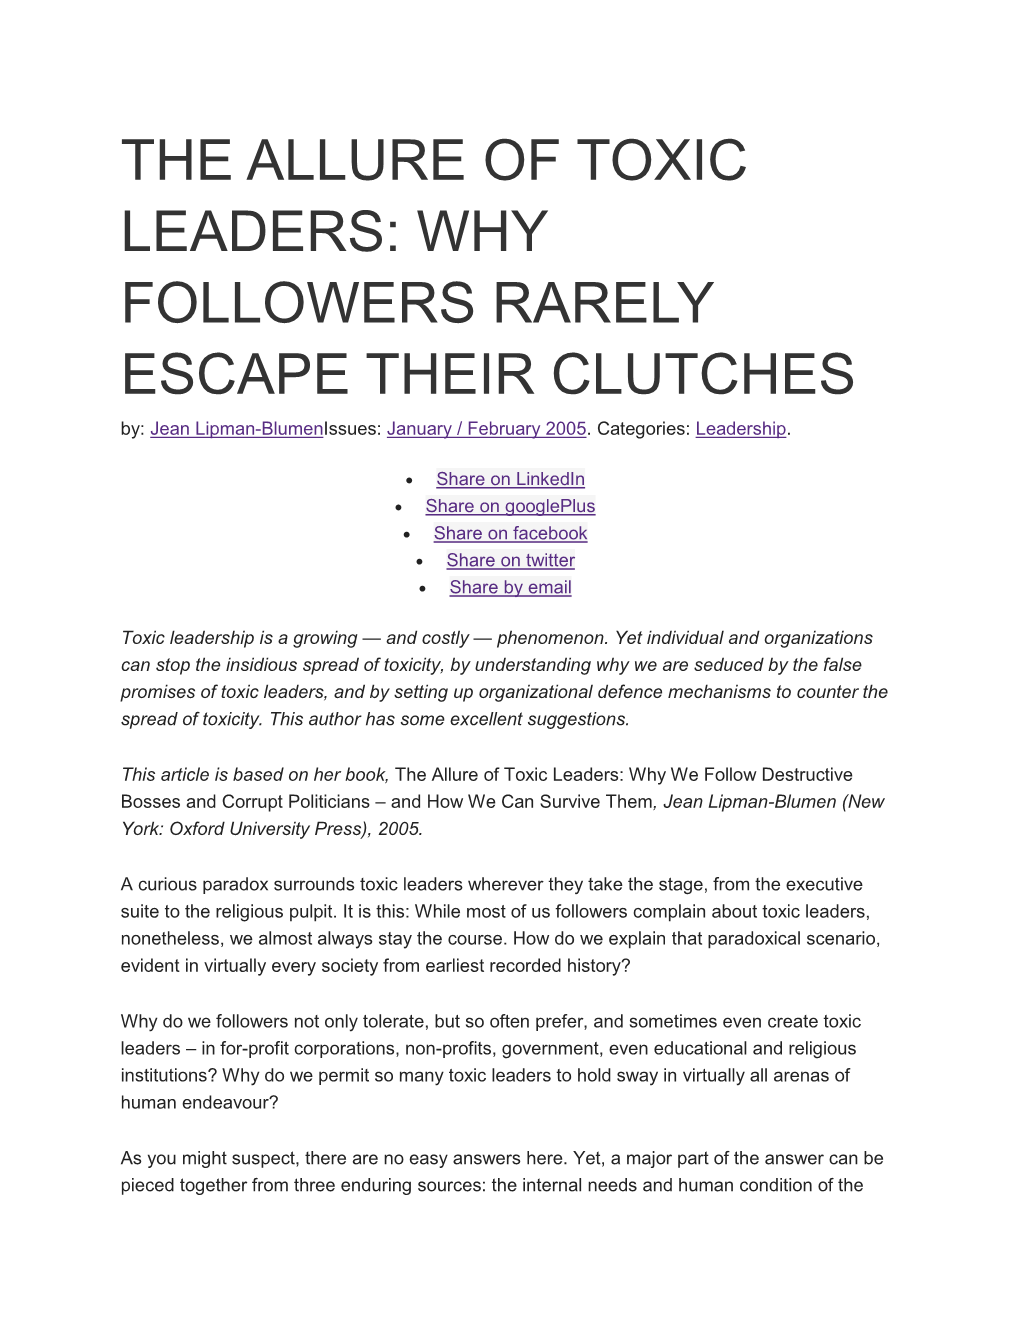 THE ALLURE of TOXIC LEADERS: WHY FOLLOWERS RARELY ESCAPE THEIR CLUTCHES By: Jean Lipman-Blumenissues: January / February 2005